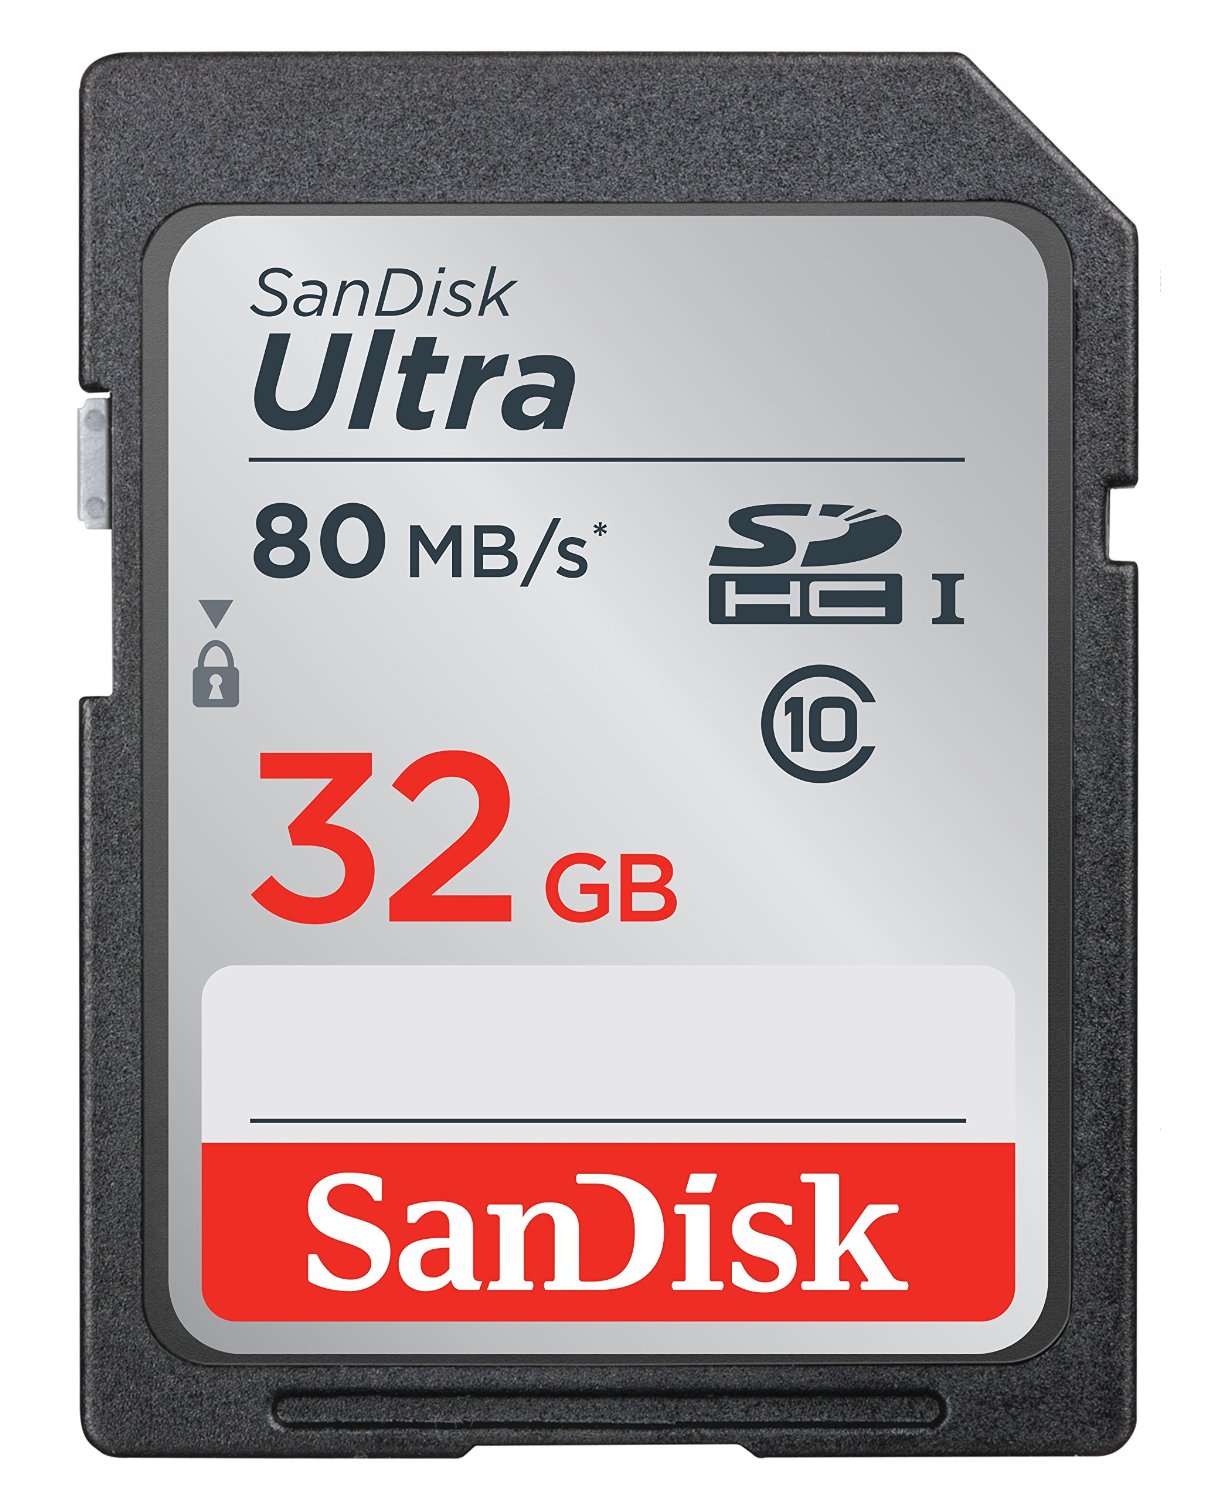 SanDisk 32GB Ultra Class 10 SDHC Memory Card – Just $9.99!